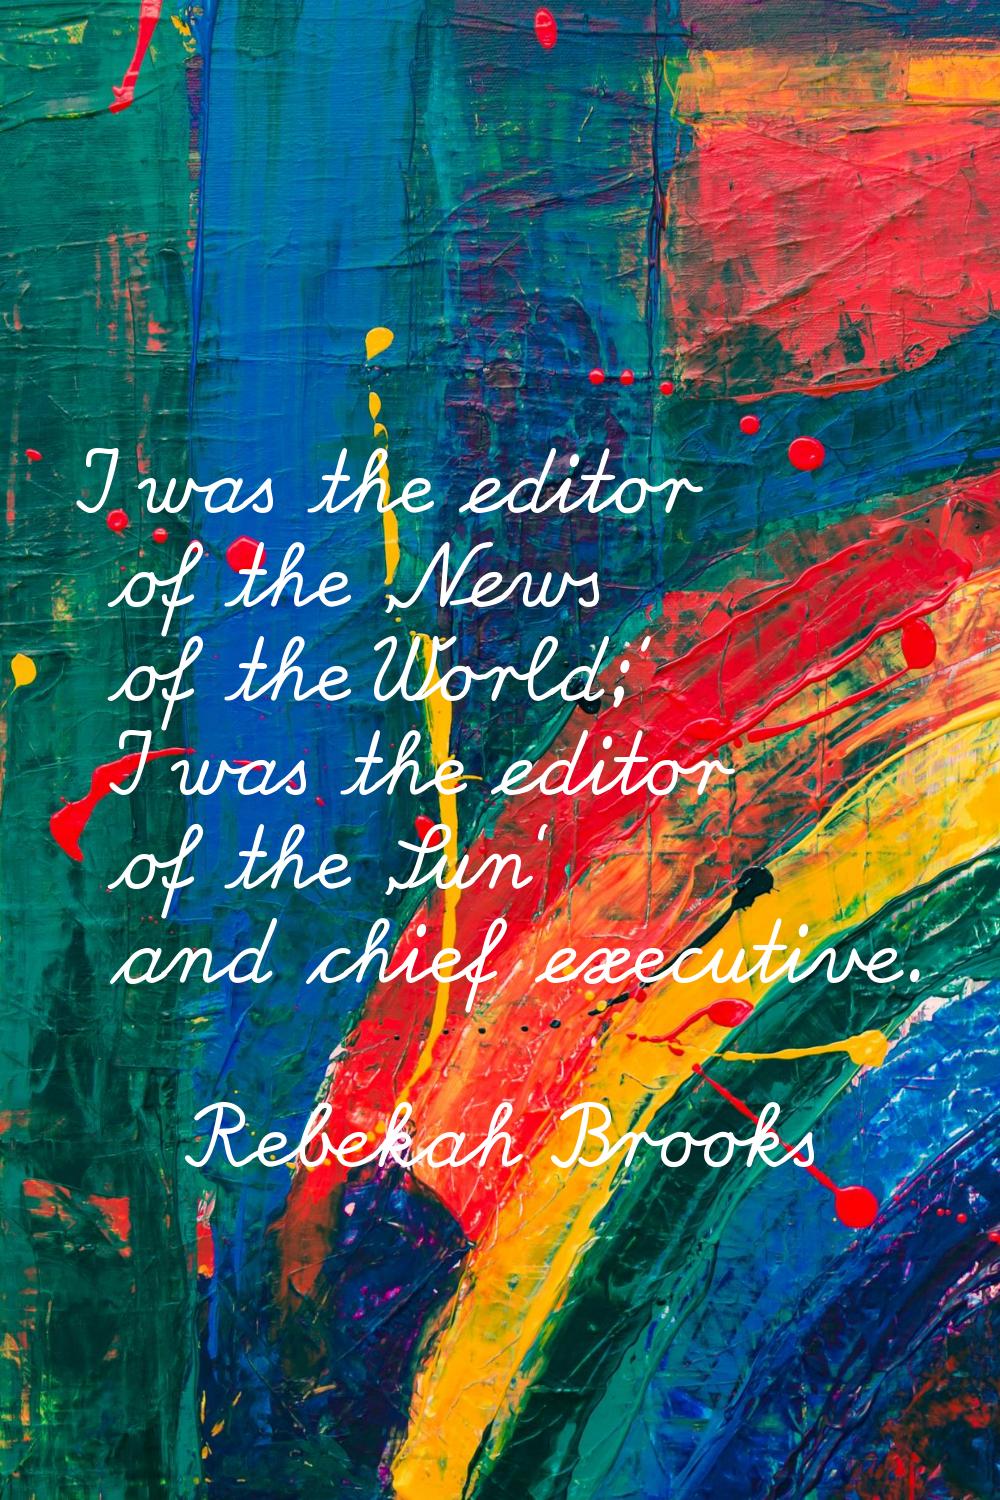 I was the editor of the 'News of the World;' I was the editor of the 'Sun' and chief executive.